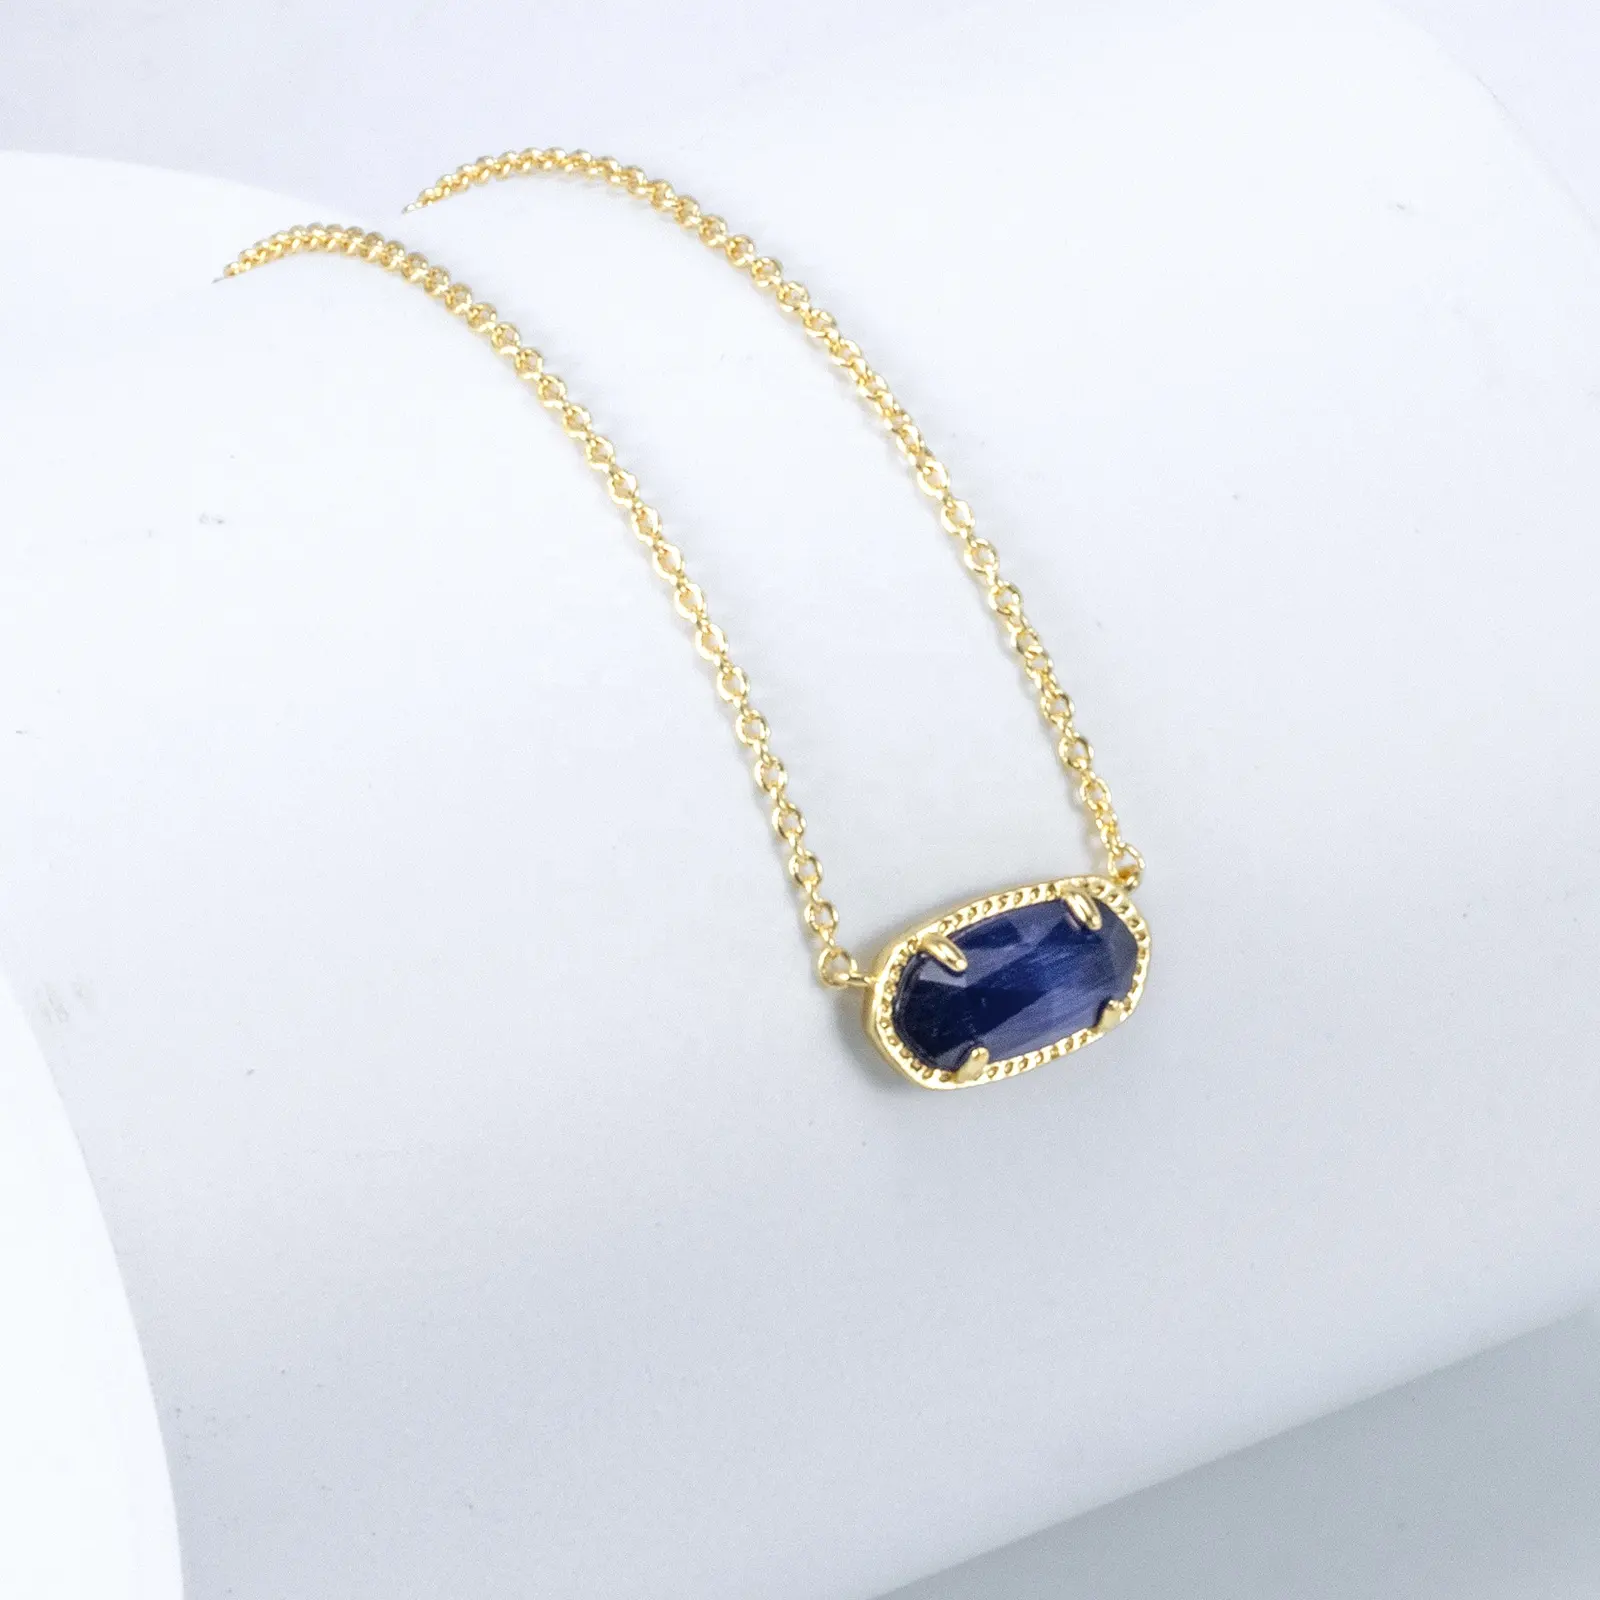 Personal Customized Natural Stone Stainless Steel Brass Necklace Crystal Pendant Gift for Women Fashion Jewelry